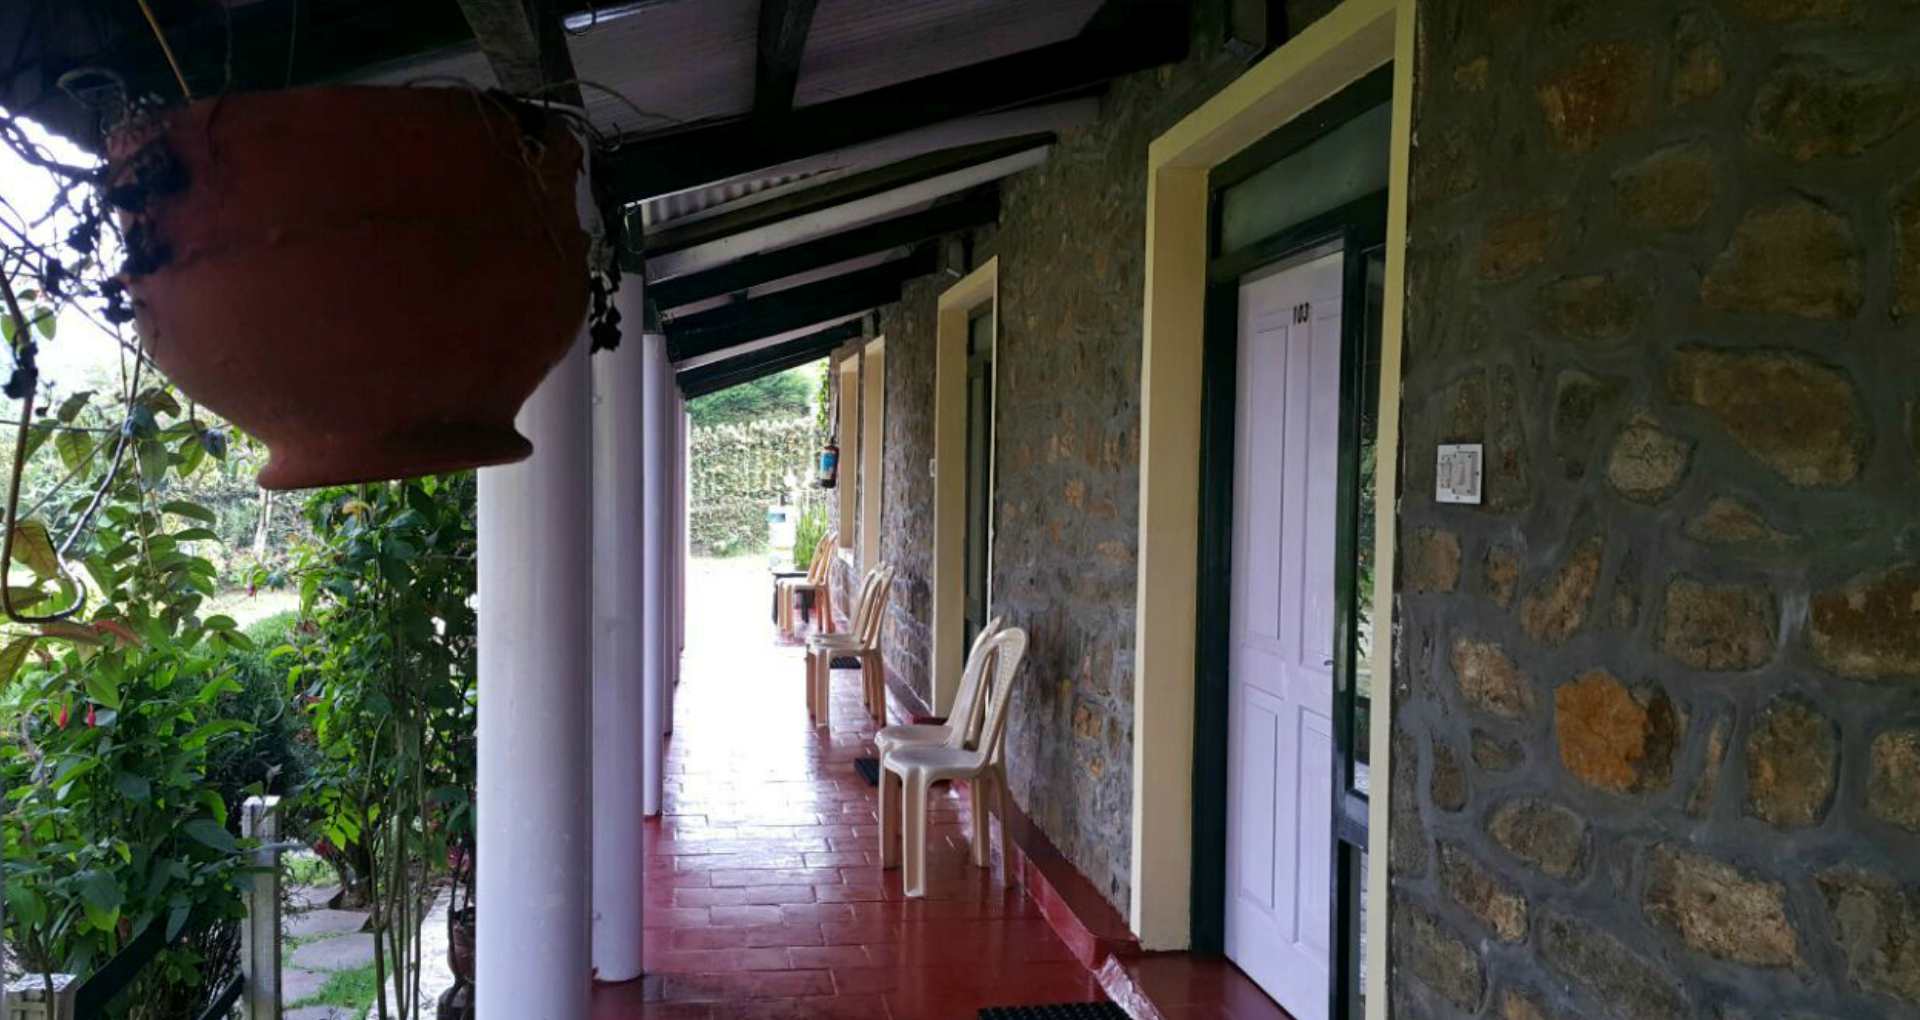 Hotels, Cottages, Rooms, Suites in Kodaikanal